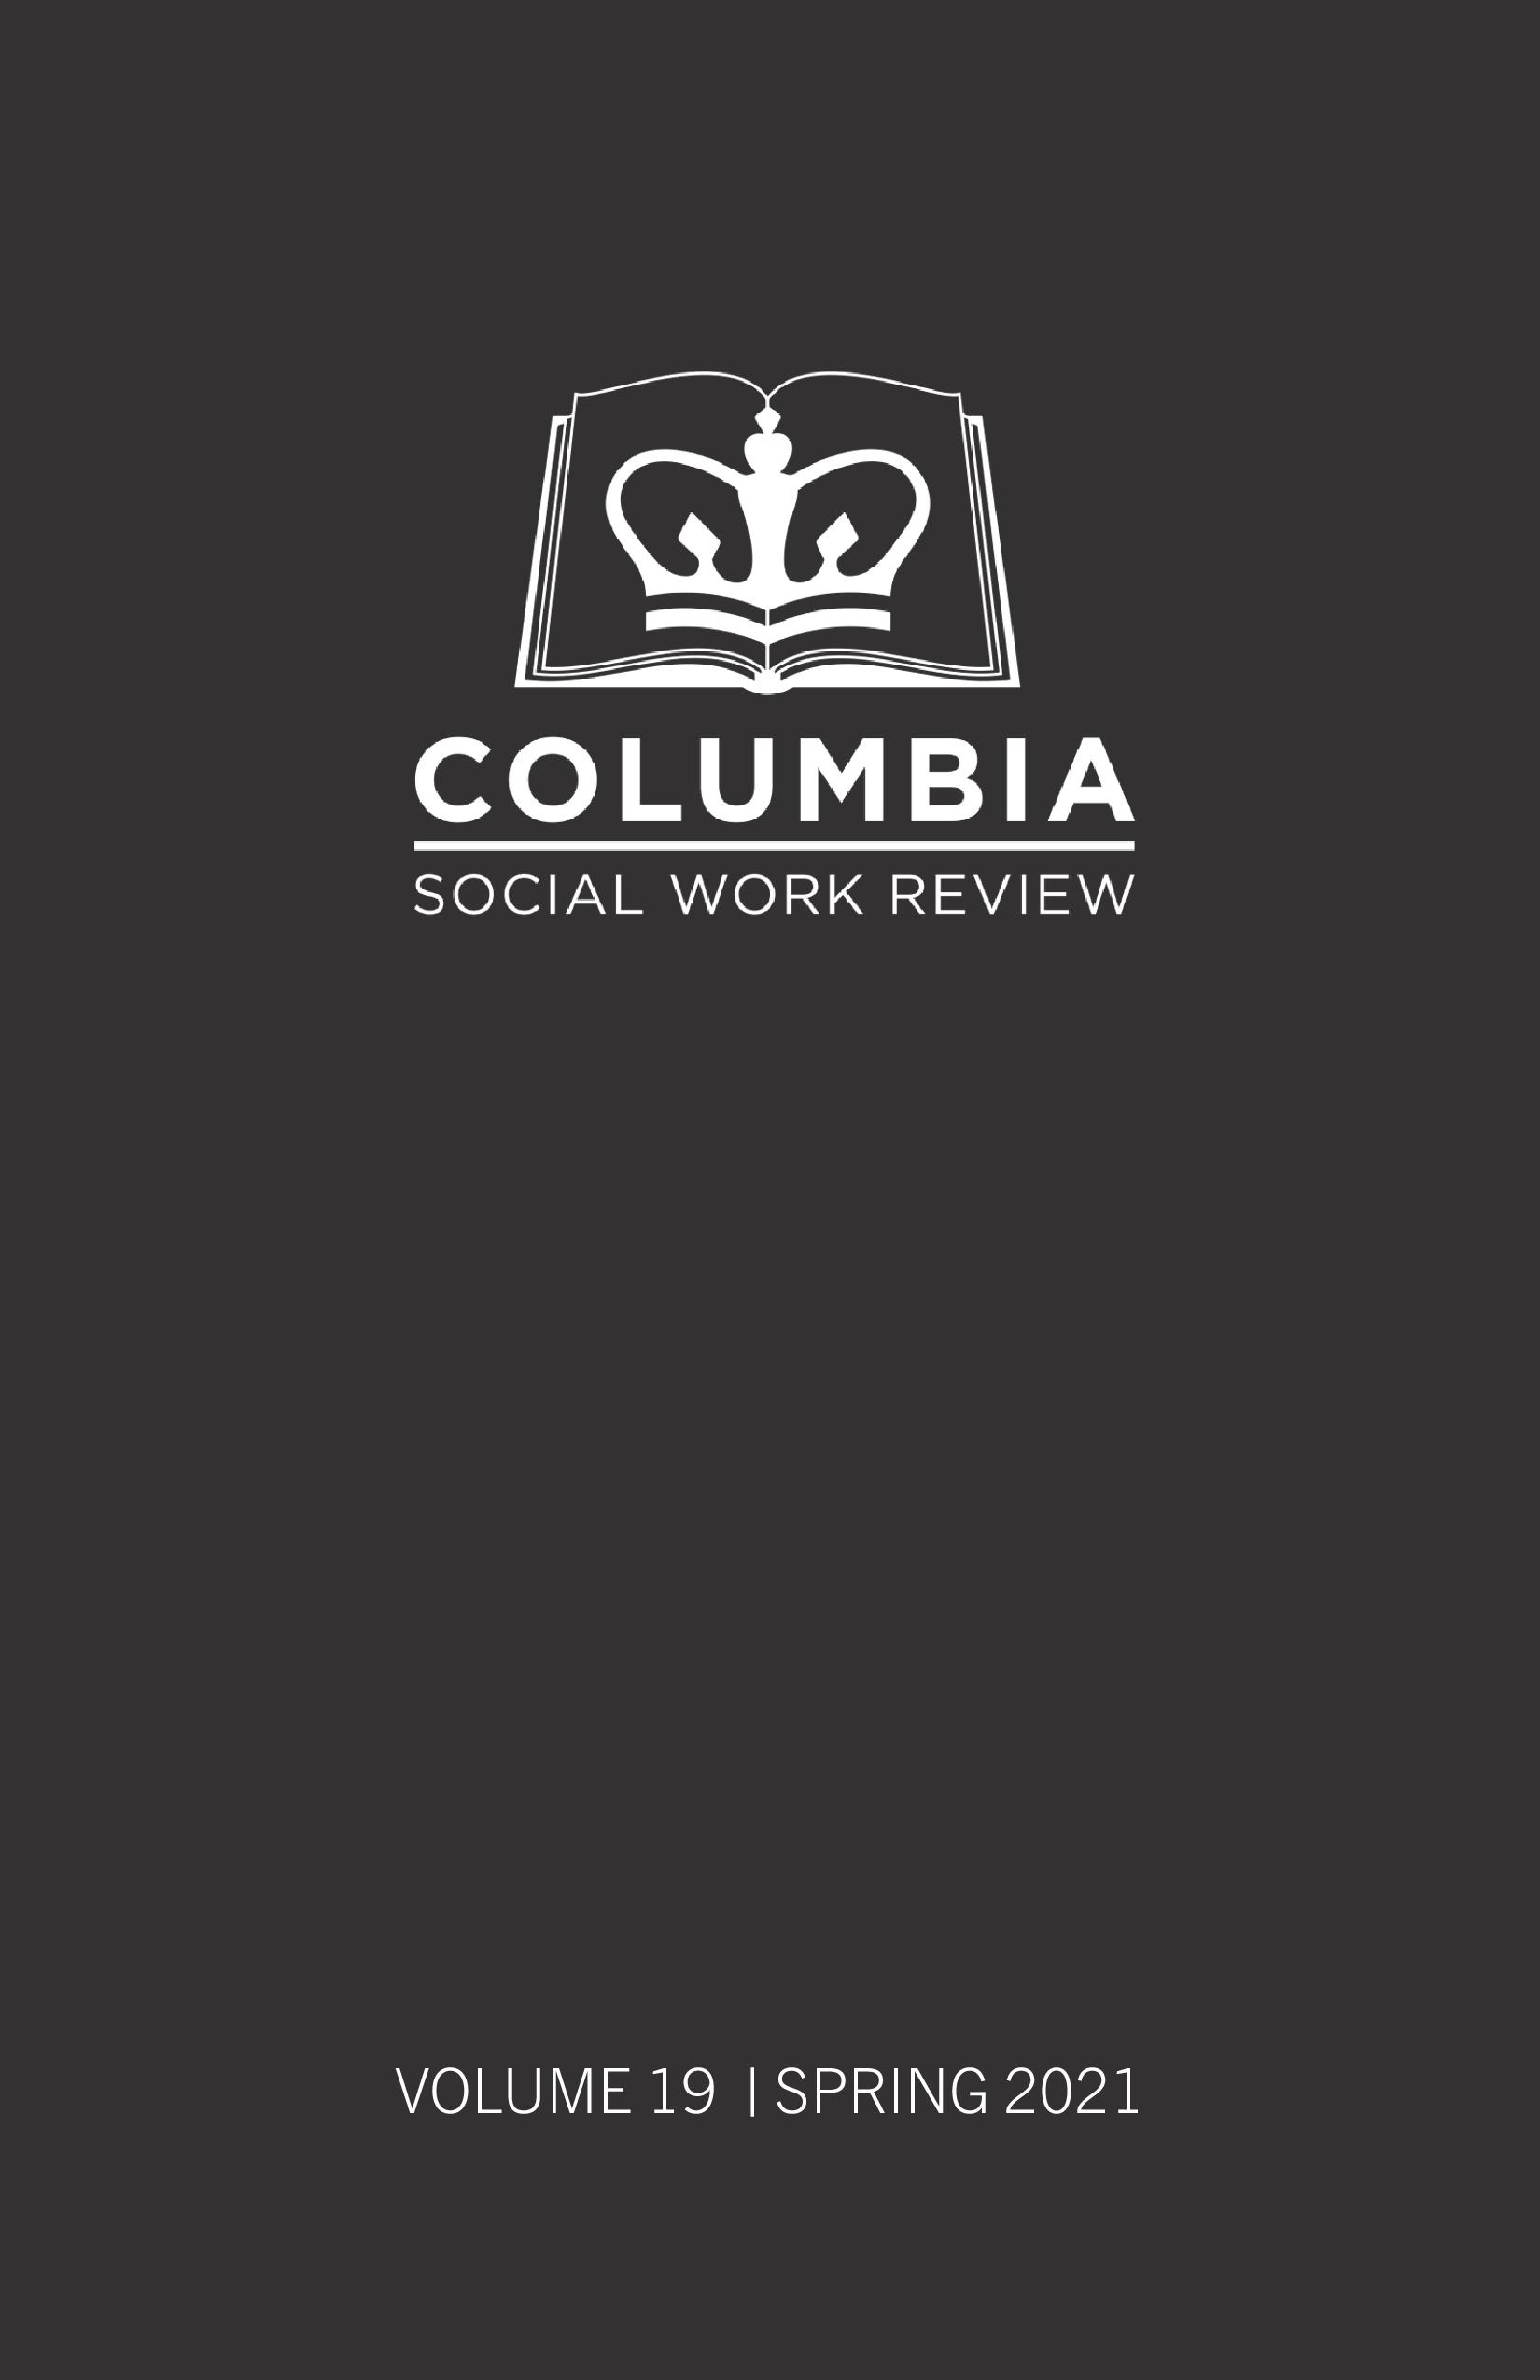 ID: Image is the cover of Volume 19 of the Columbia Social Work Review journal. The background is a matte dark black gray tone. In the upper center of the image is a white logo of the Columbia University crown placed in the center of a white-outlined open book. Under the book is white Sans Serif block text font that reads "Columbia" with a white line below the word. Under the white line are the words "Social Work Review" in white thin Sans Serif block text font. At the bottom center of the image it states "Volume 19 | Spring 2021" also in white Sans Serif block text.